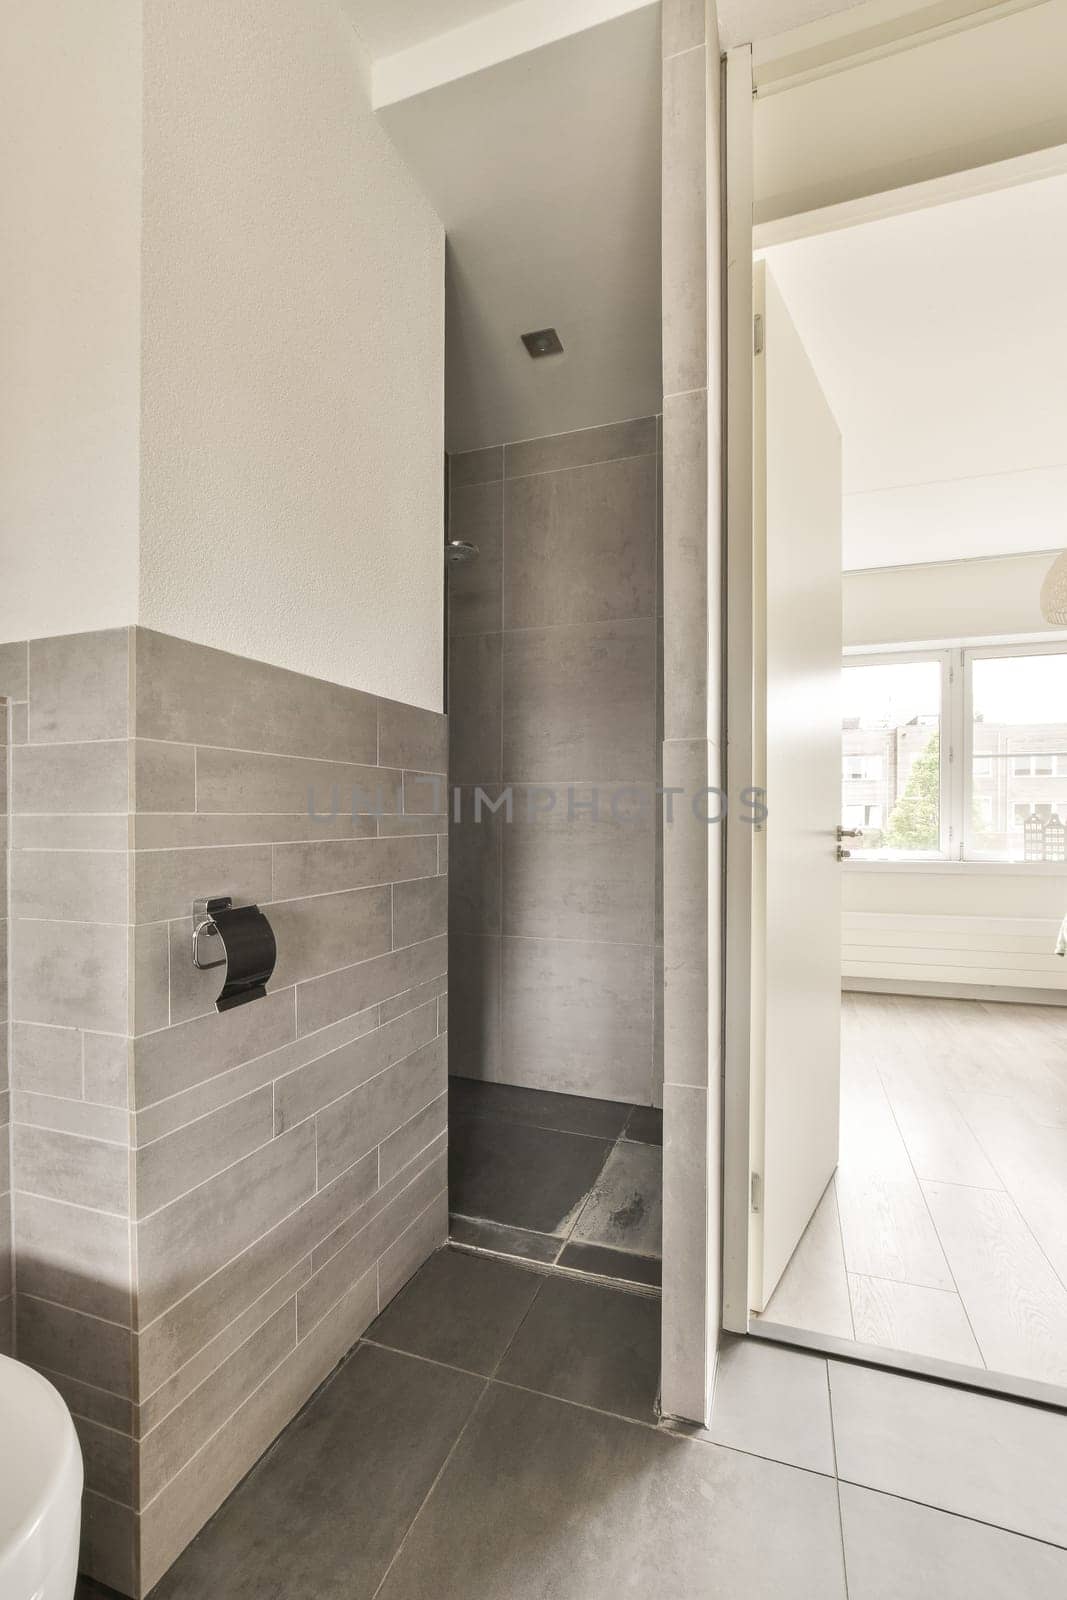 a bathroom with a toilet and shower stall on the floor in front of an open door that leads to a walk - in shower